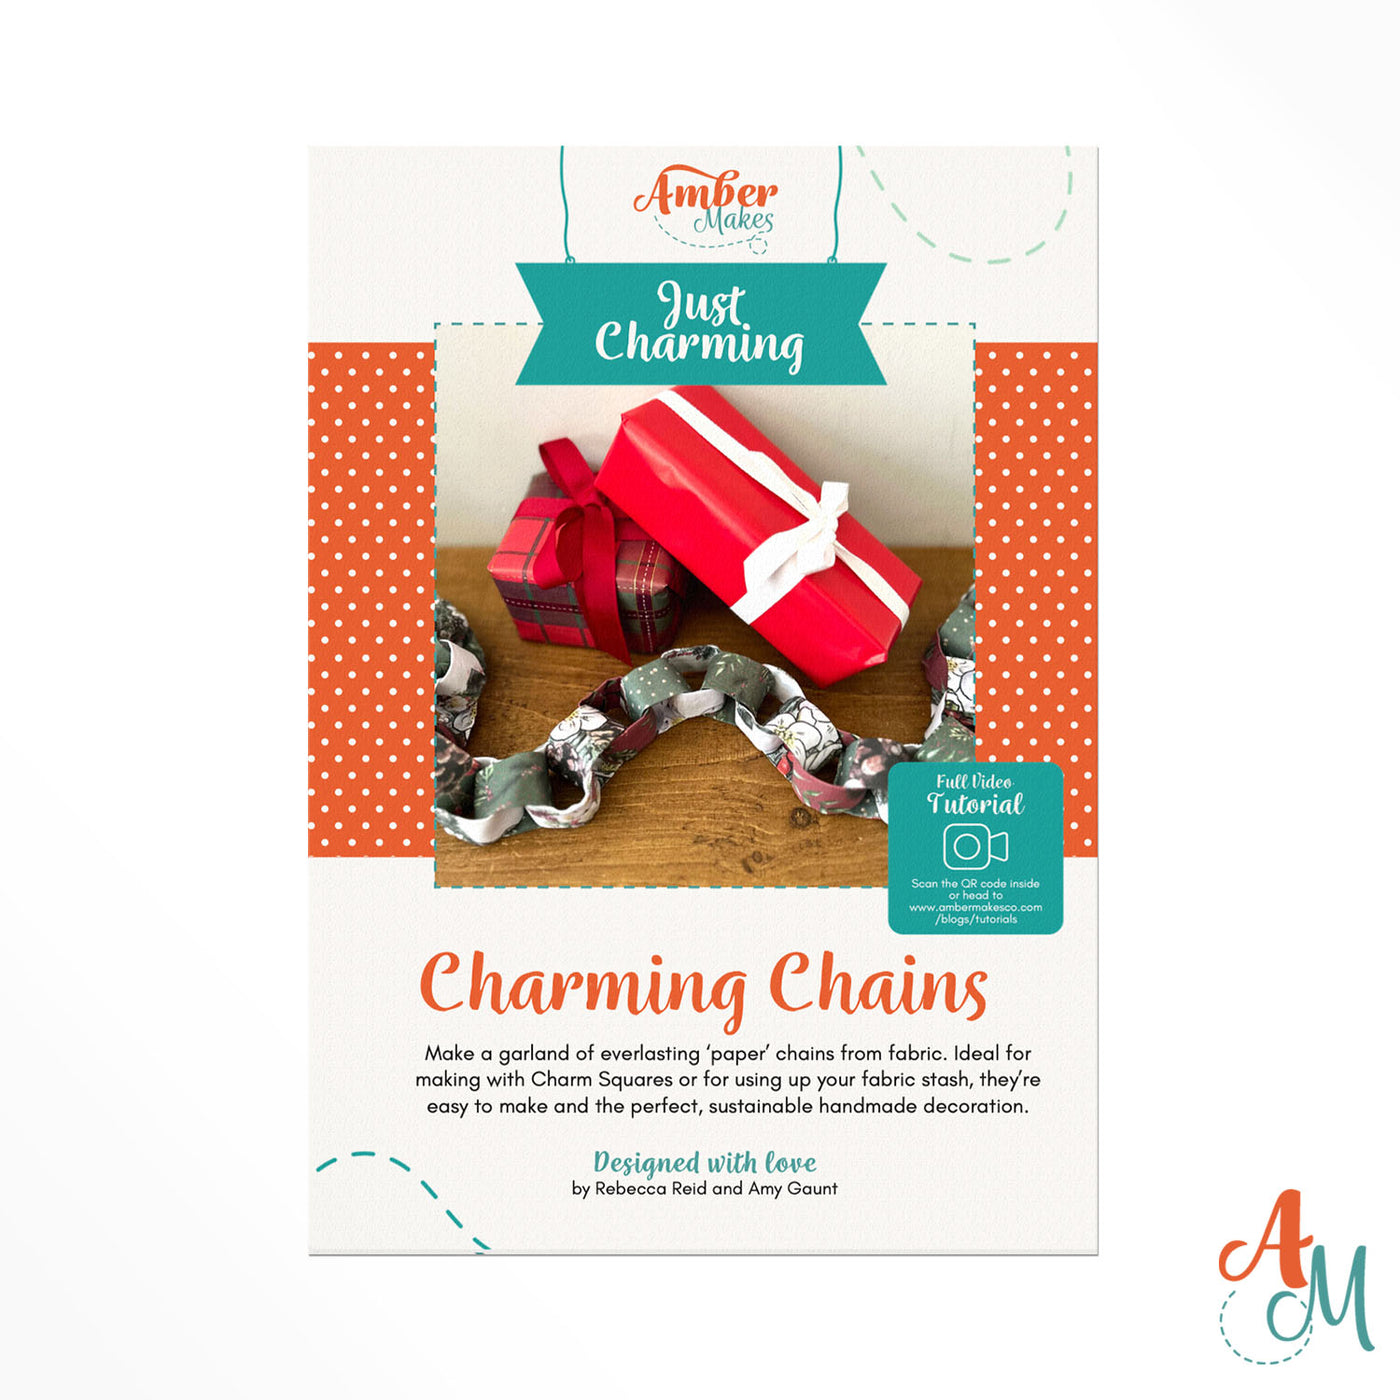 Just Charming - Charming Chains pattern PDF Download Instructions Booklet